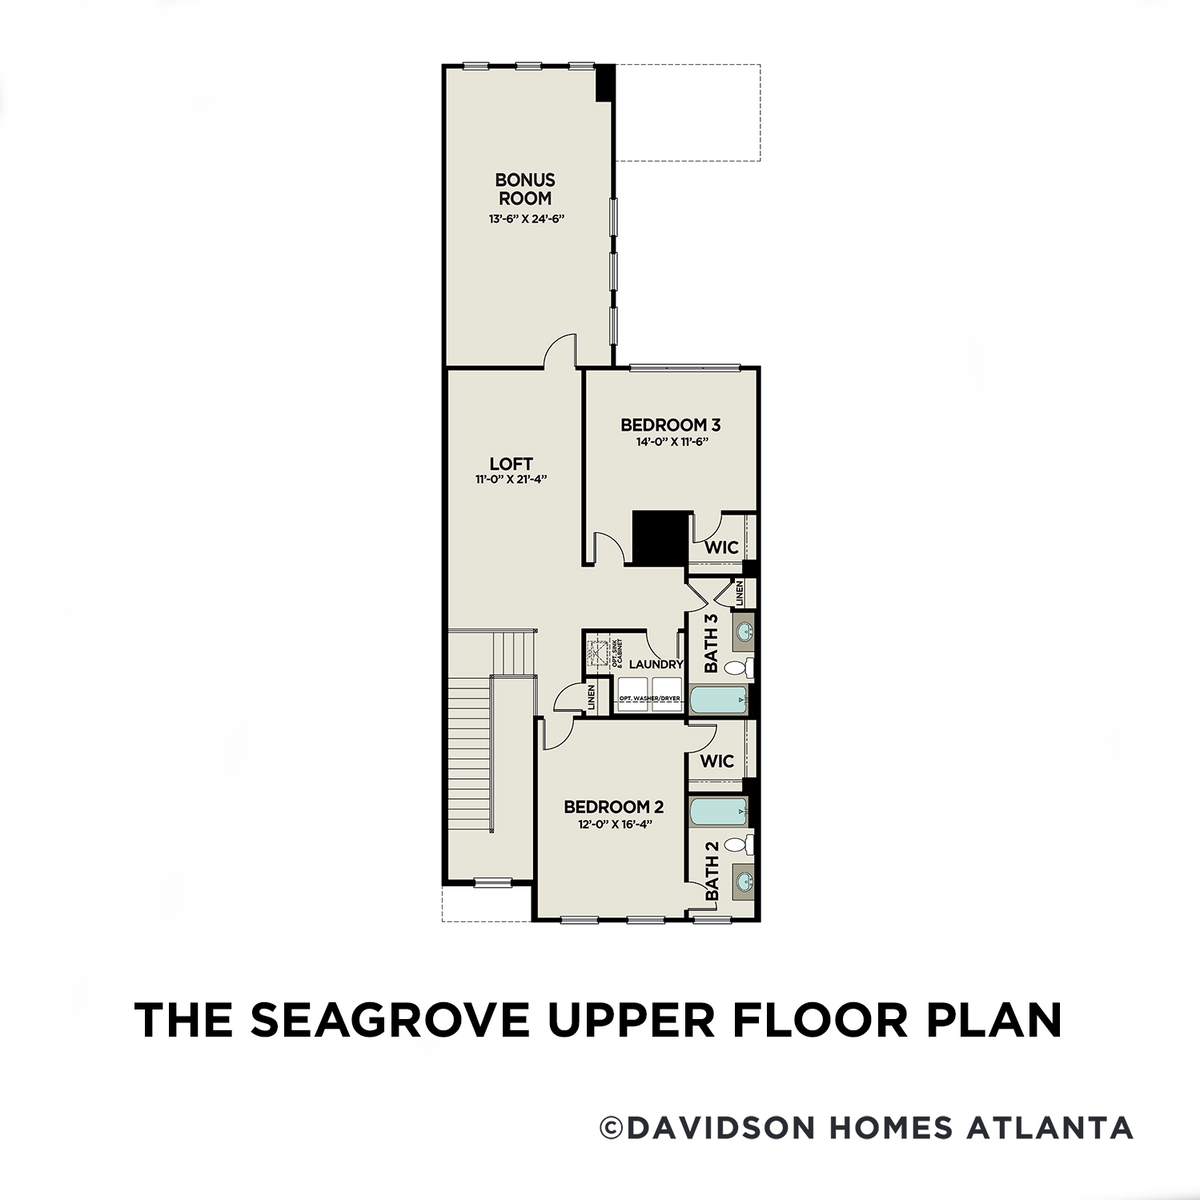 2 - The Seagrove B floor plan layout for 648 Stickley Oak Way in Davidson Homes' The Village at Towne Lake community.